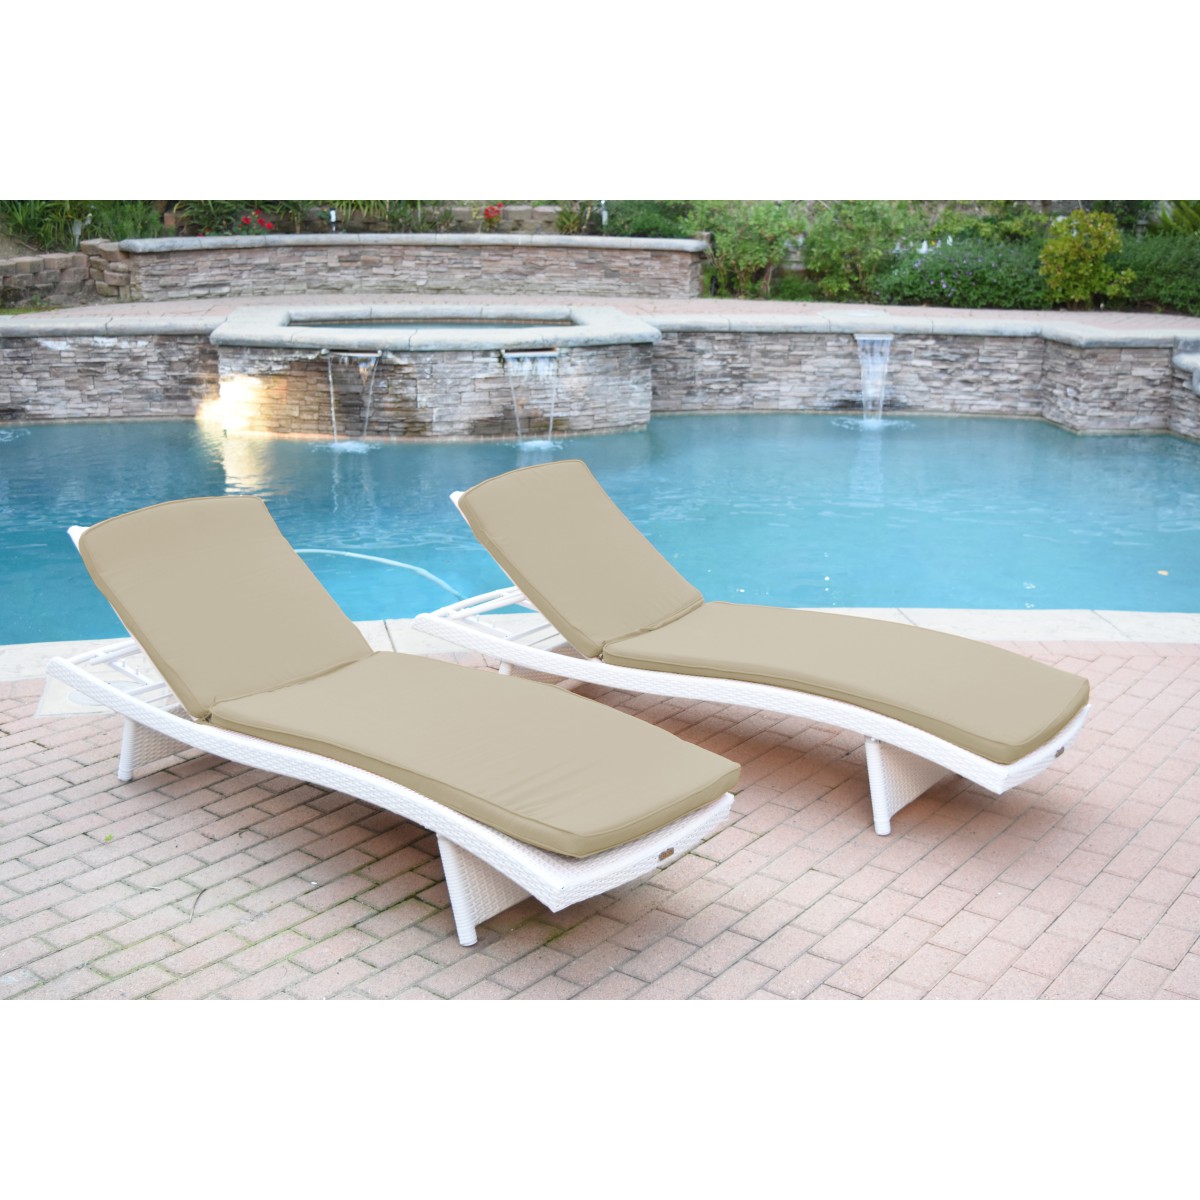 White Wicker Adjustable Chaise Lounger with Tan Cushion - Set of 2